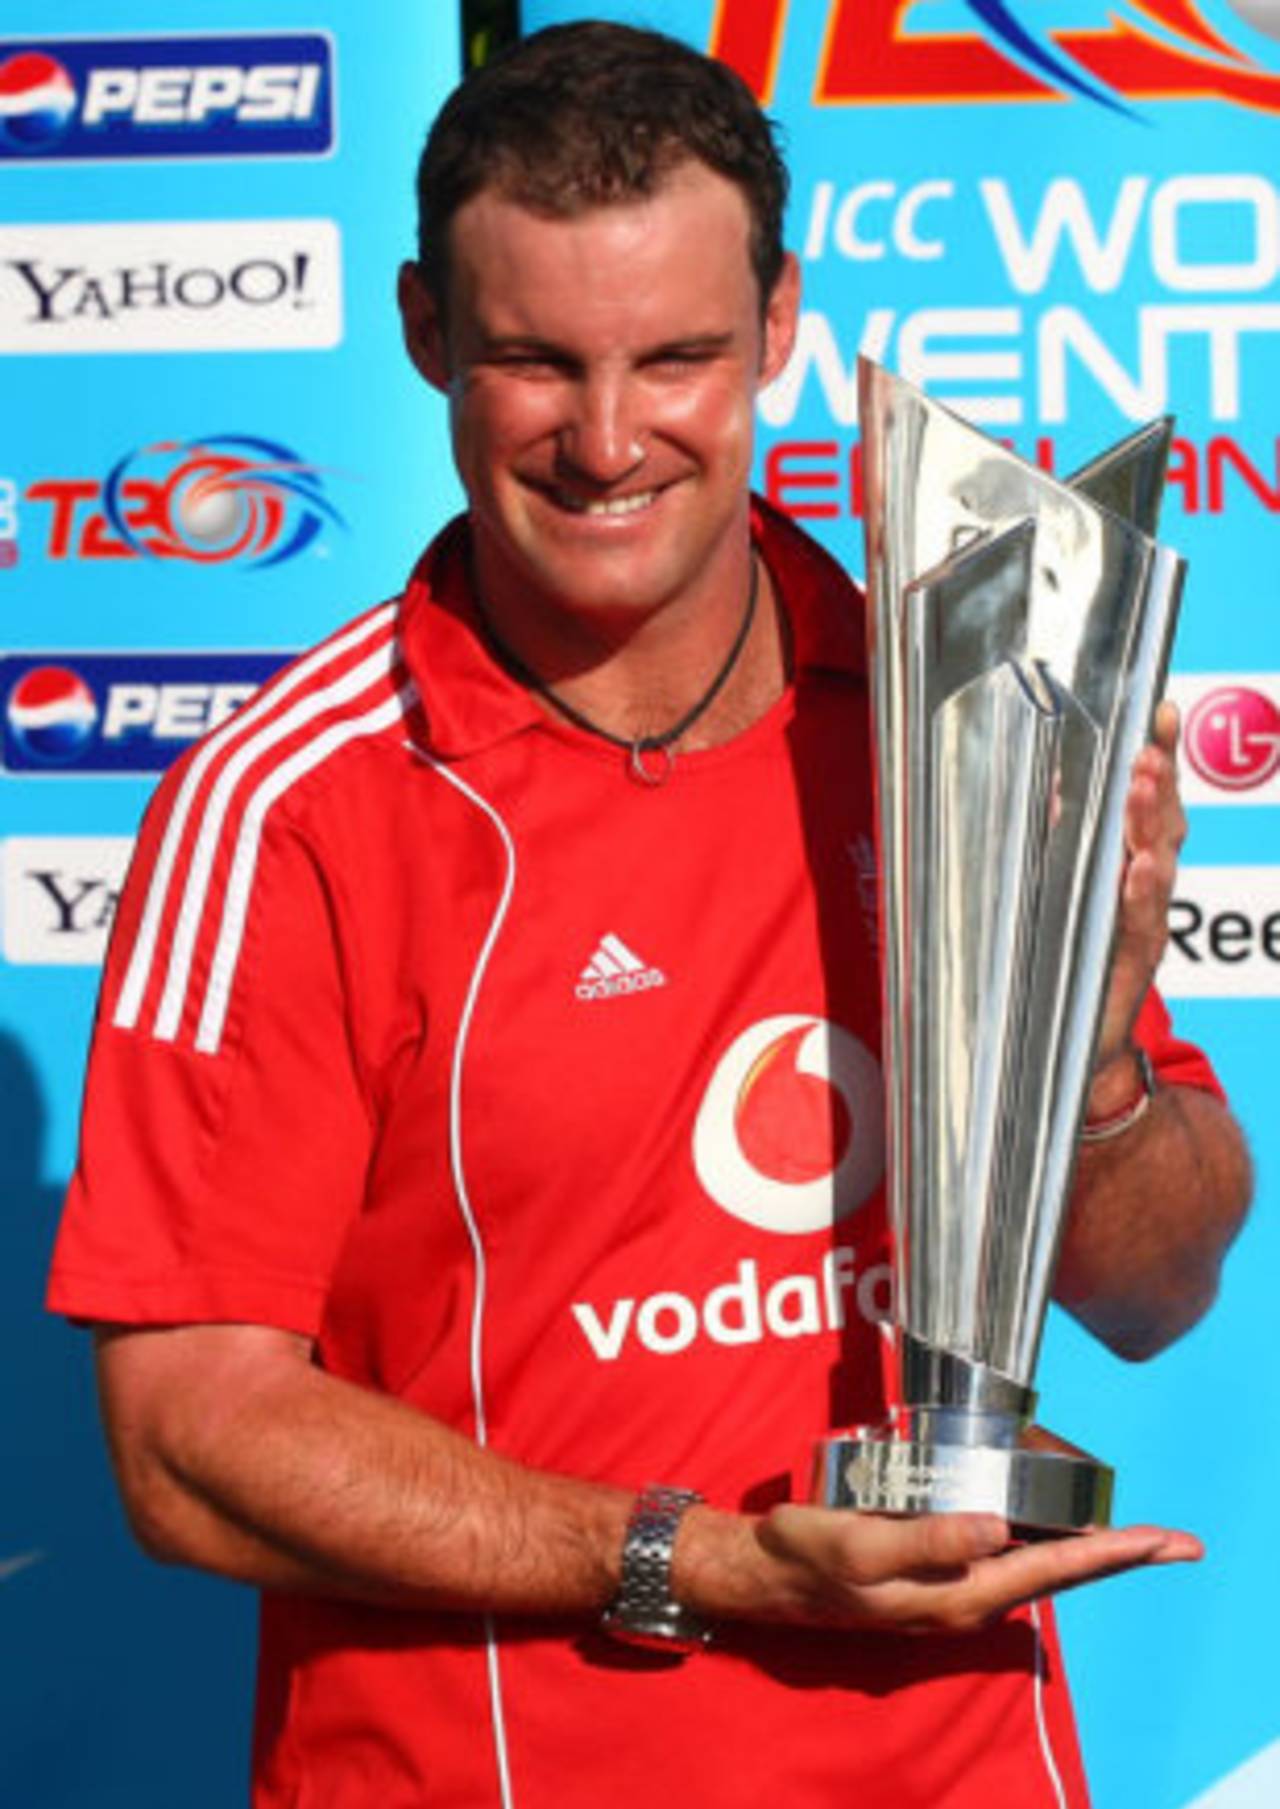 Andrew Strauss with the ICC World Twenty20 trophy 24 hours before England's match against West Indies, Trinidad, March 14, 2009